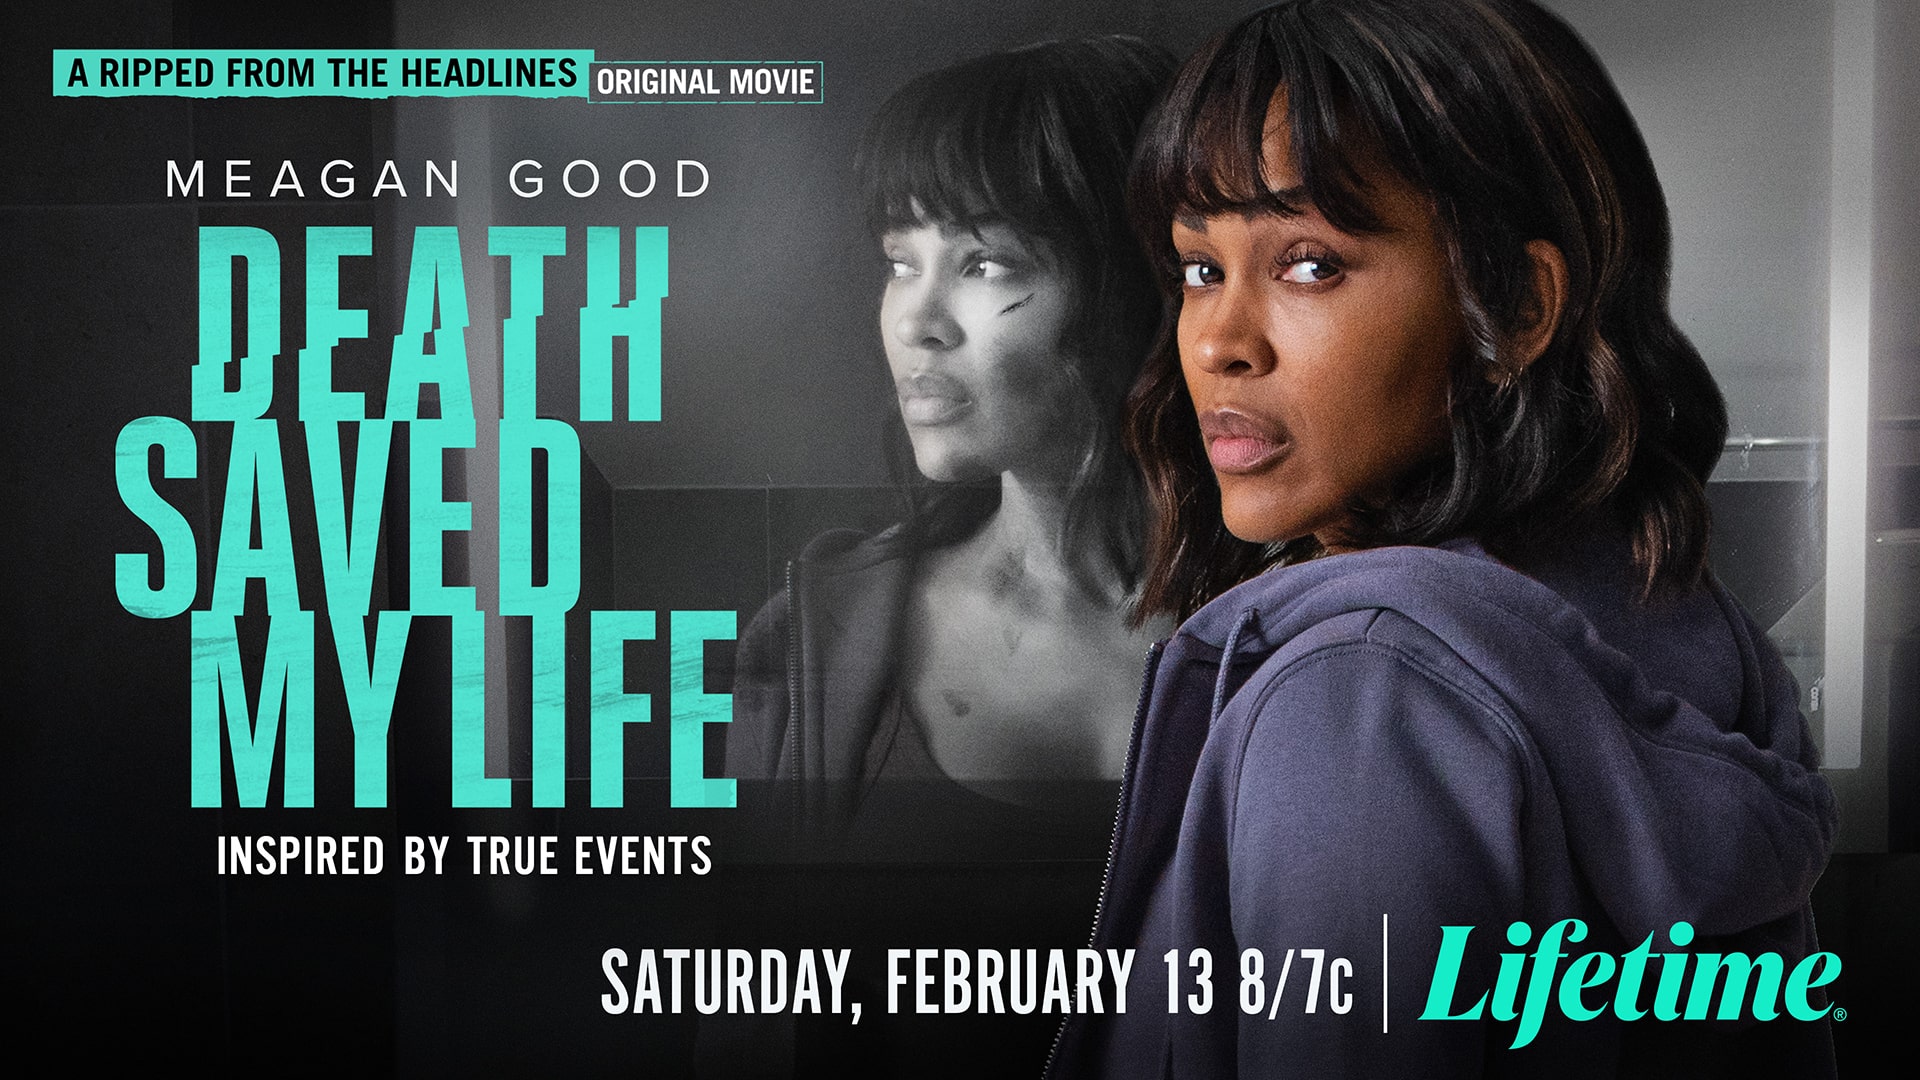 Death Saved My Life Stars Meagan Good She Discusses Mental Health In Interview Alexus Renee Celebrity Myxer